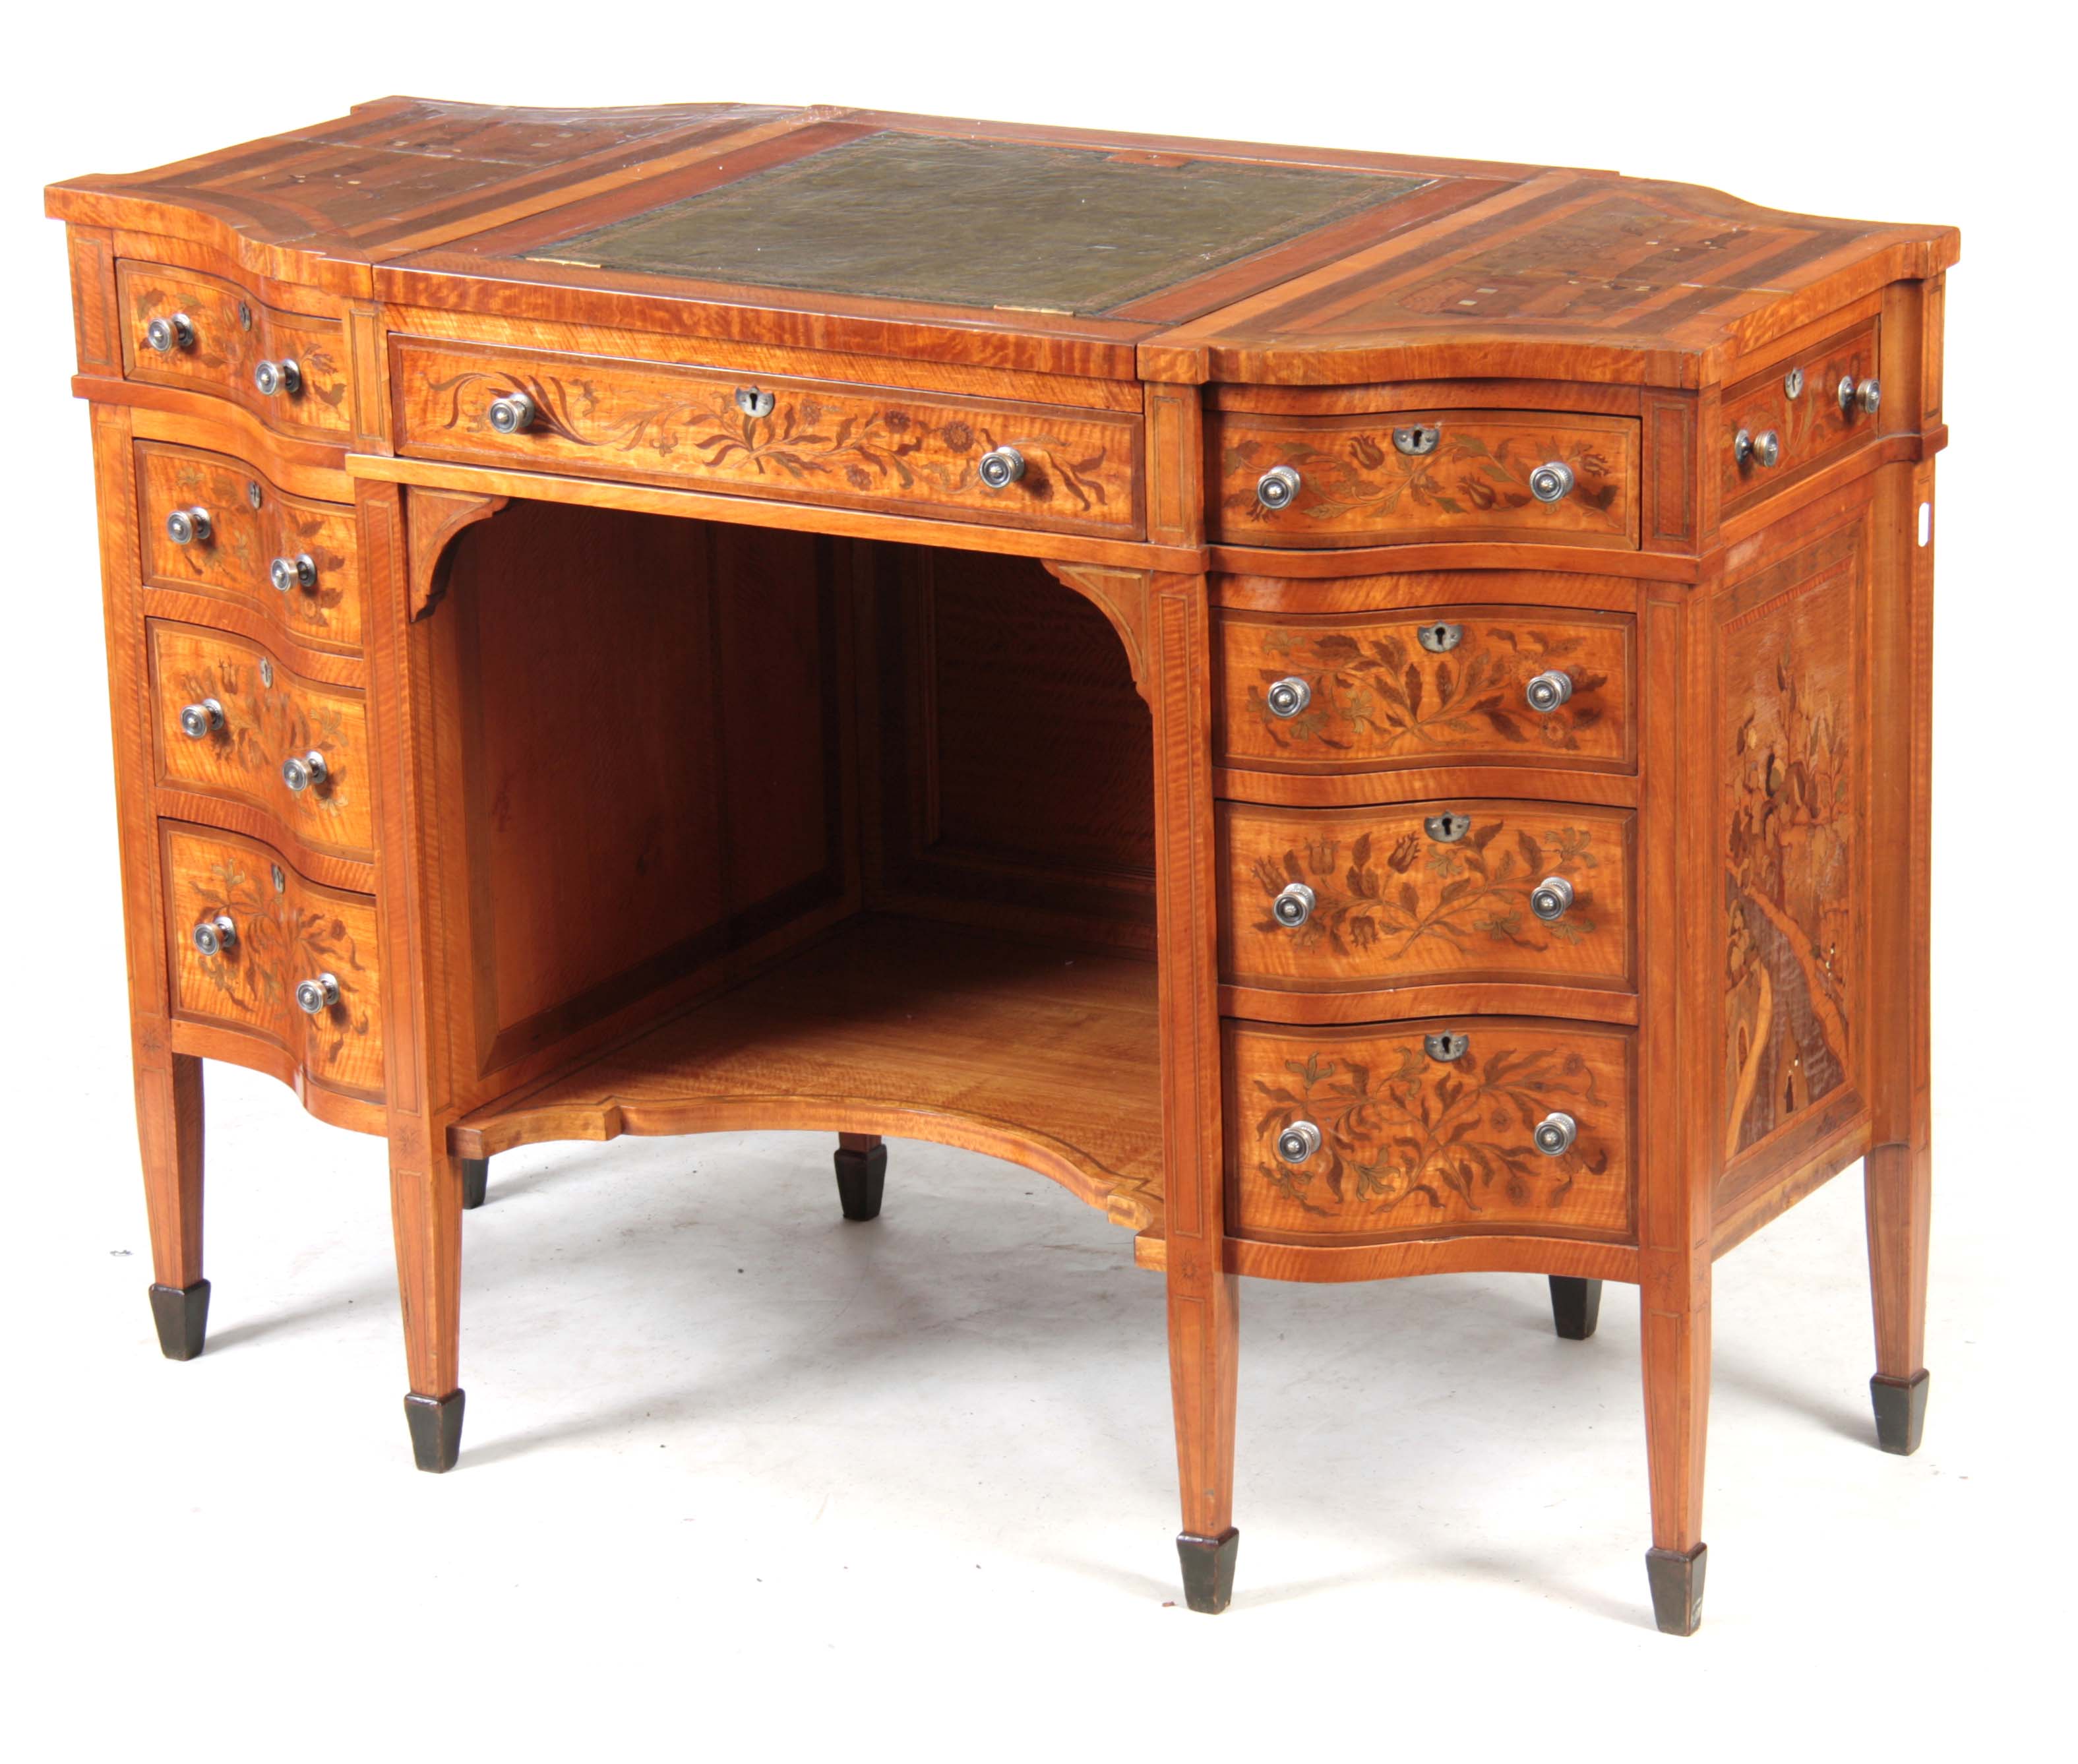 AN UNUSUAL FREESTANDING VICTORIAN SATINWOOD INLAID DESK with floral inlaid serpentine drawers to the